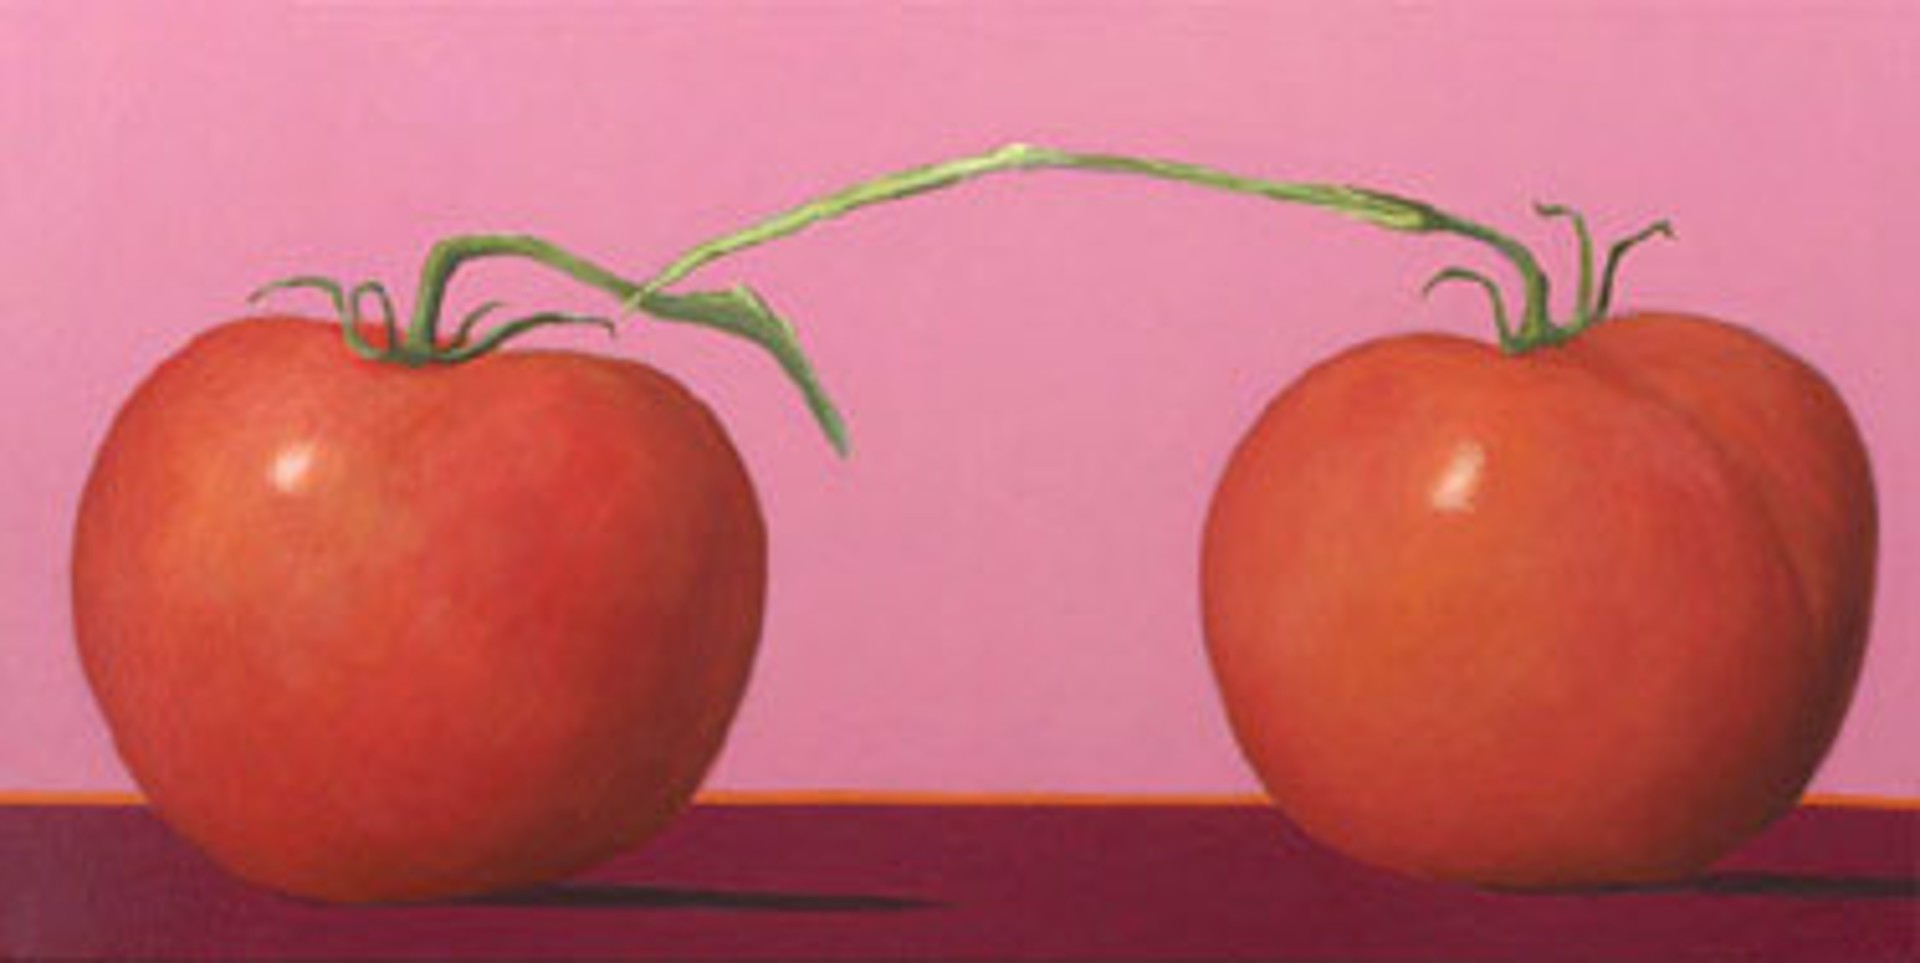 Touching Tomatoes by Bill Chisholm